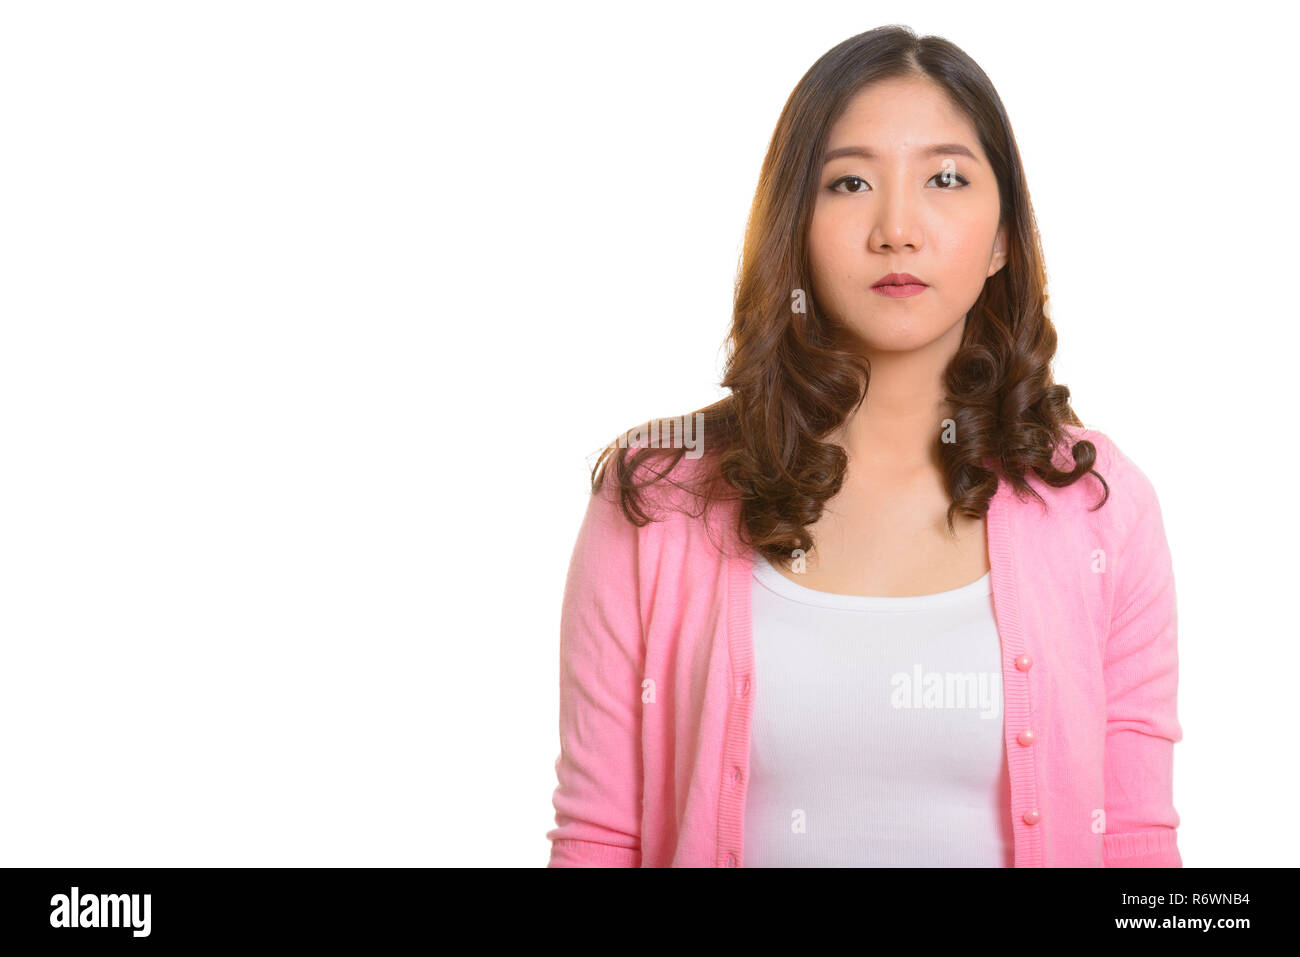 Portrait of young beautiful Asian woman against white background Banque D'Images